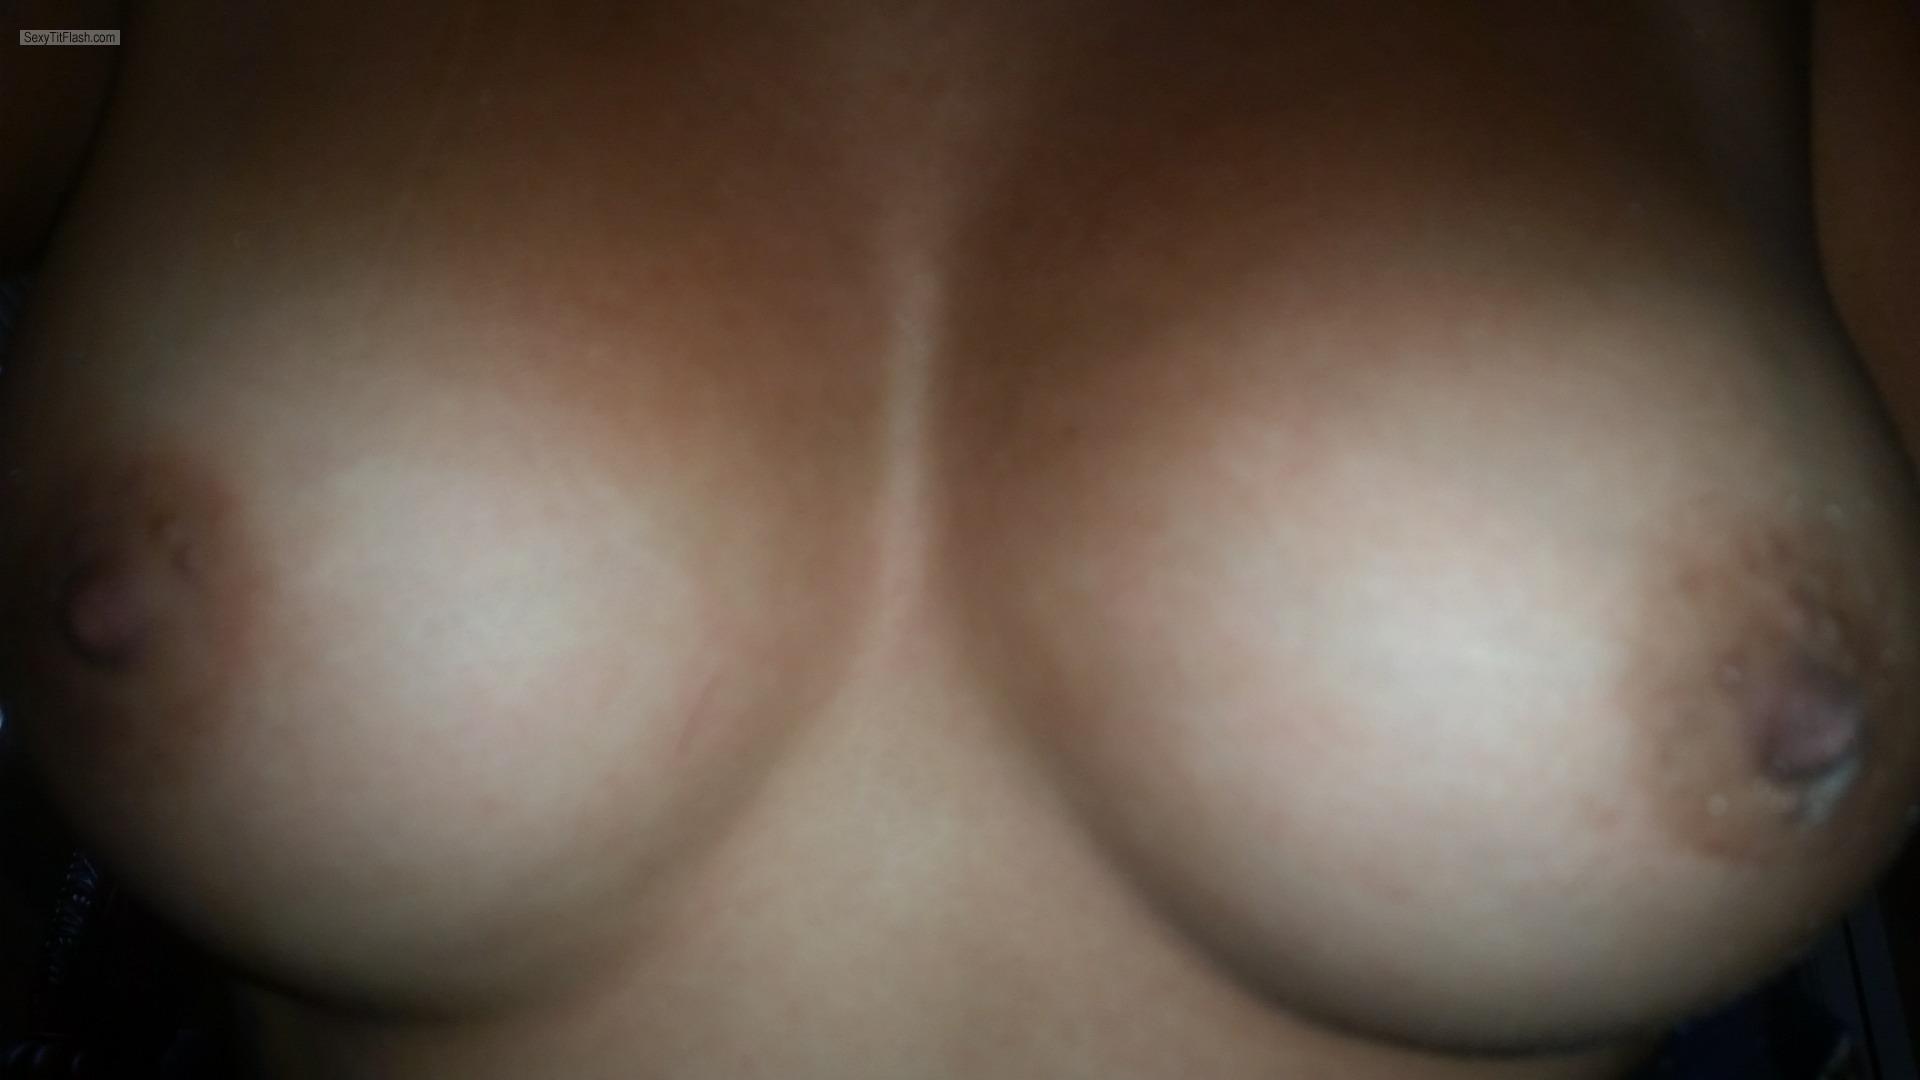 Tit Flash: My Very Small Tits - Hot Girl from United Kingdom